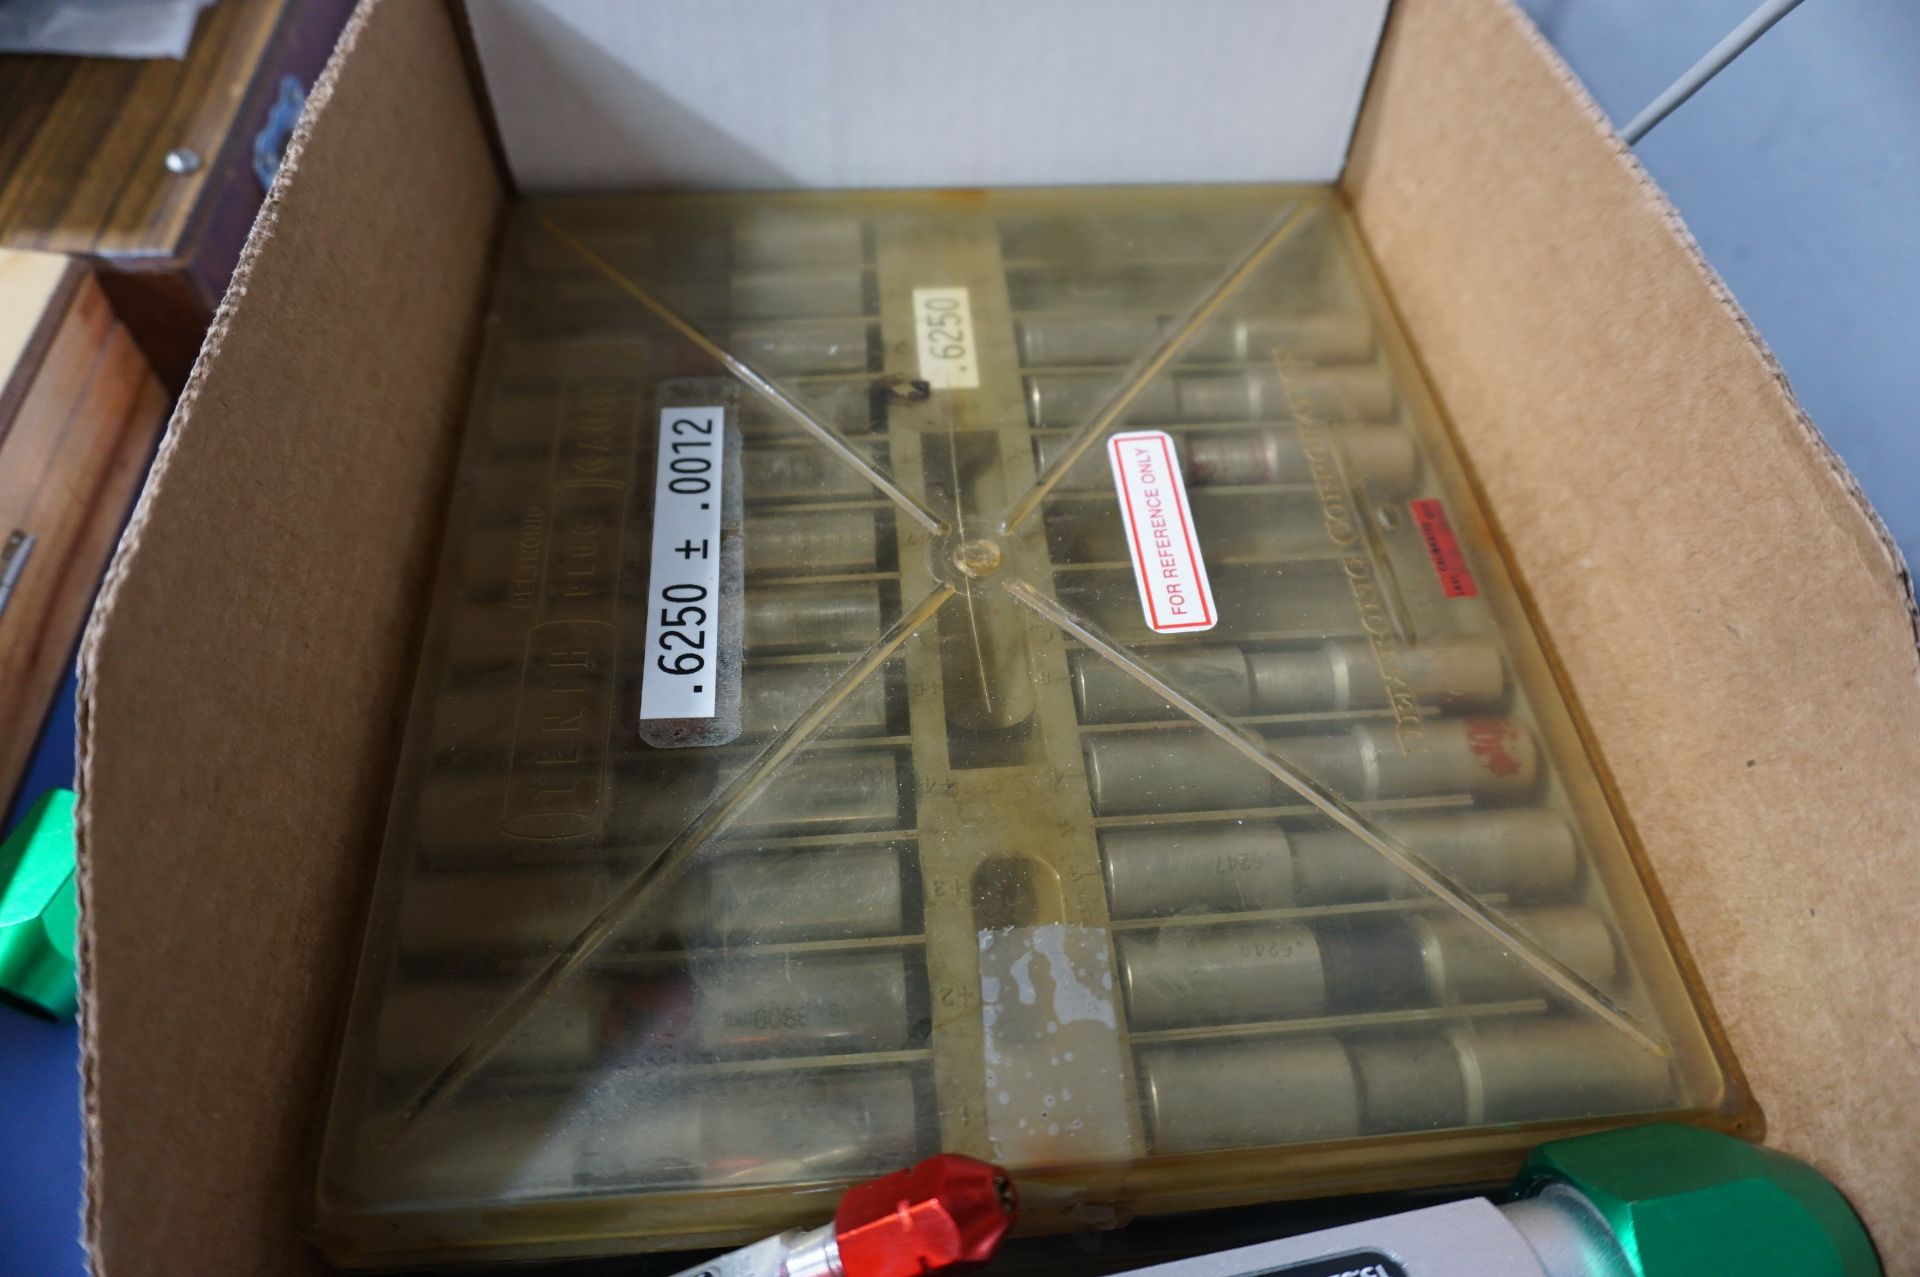 LOT TO INCLUDE: (2 BOXES) MISC. DELTRONIC PIN GAGE SETS VARIED SIZES, MEYER GAGE GO AND NO GO PIN - Image 3 of 5